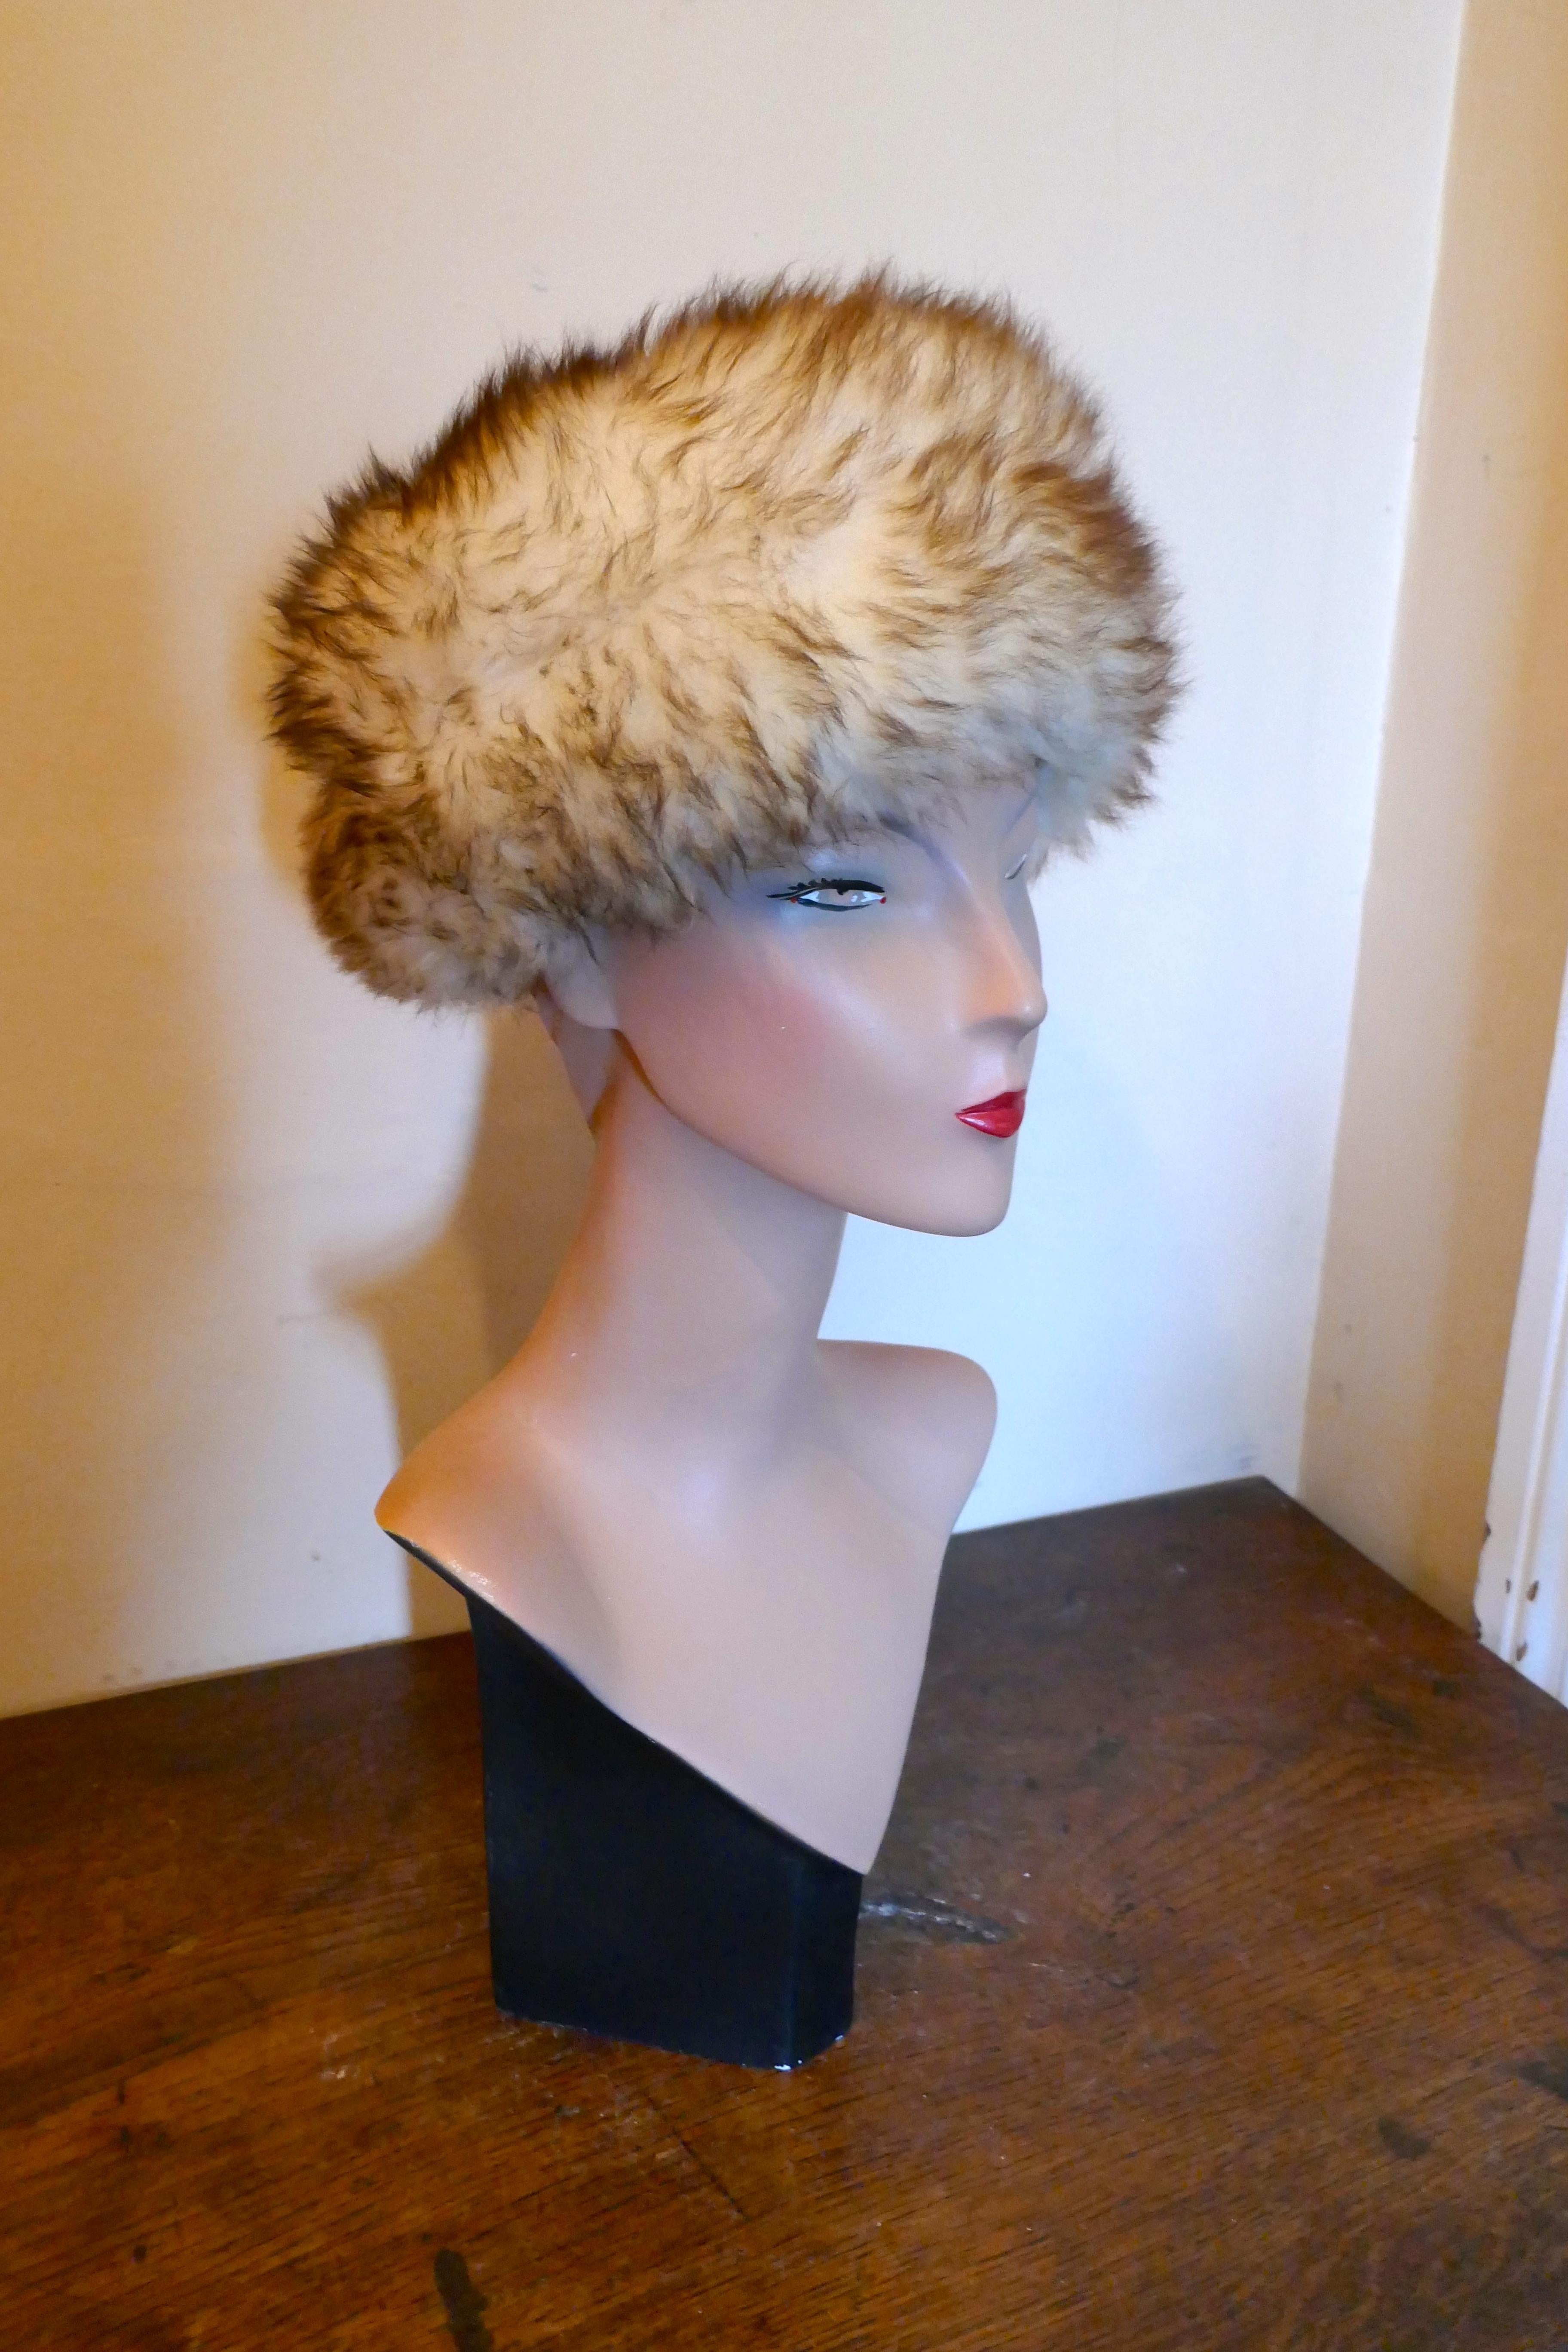 Original 1960s Sheepskin Cossack Style Winter Hat 

This gorgeous Hat is very light but warm and fashionable, it has beautiful deep furry pile with a dark highlight overlay 
This one is an exquisite design wear it anywhere and keep warm
The hat is